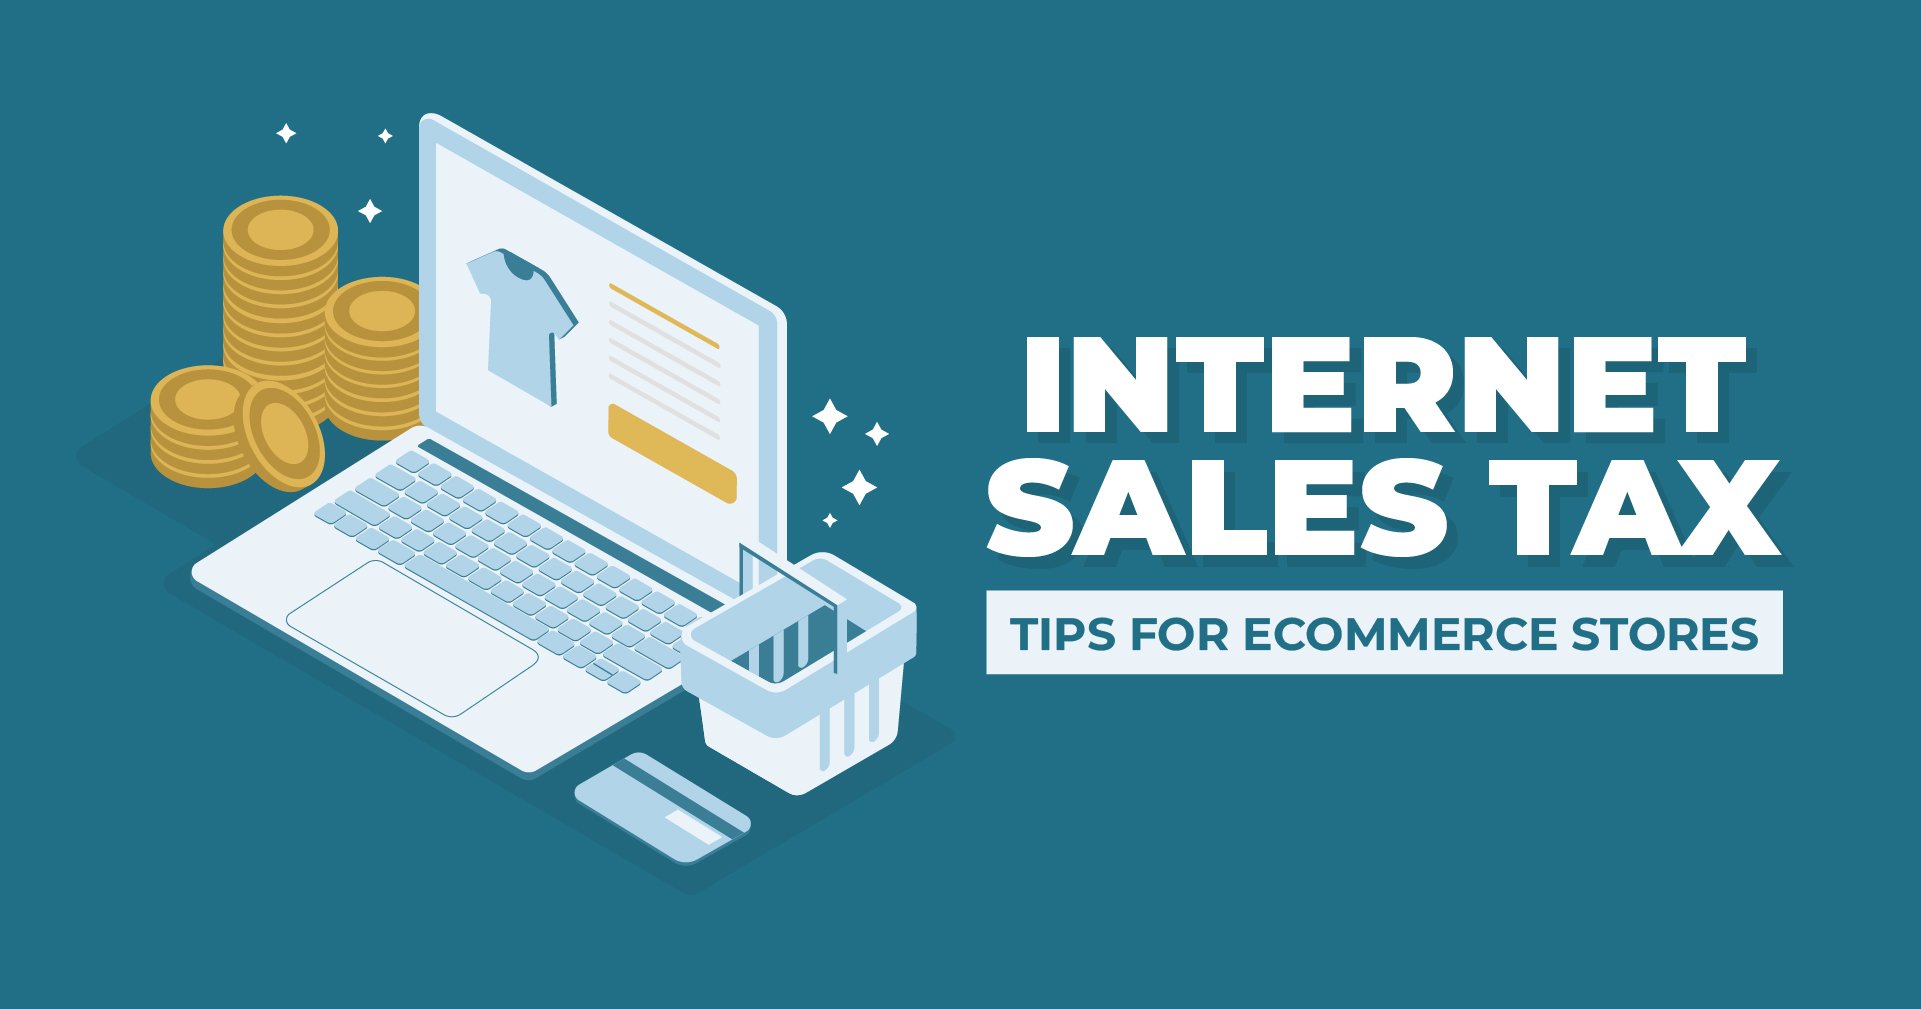 Internet Sales Tax - Tips for Ecommerce Stores